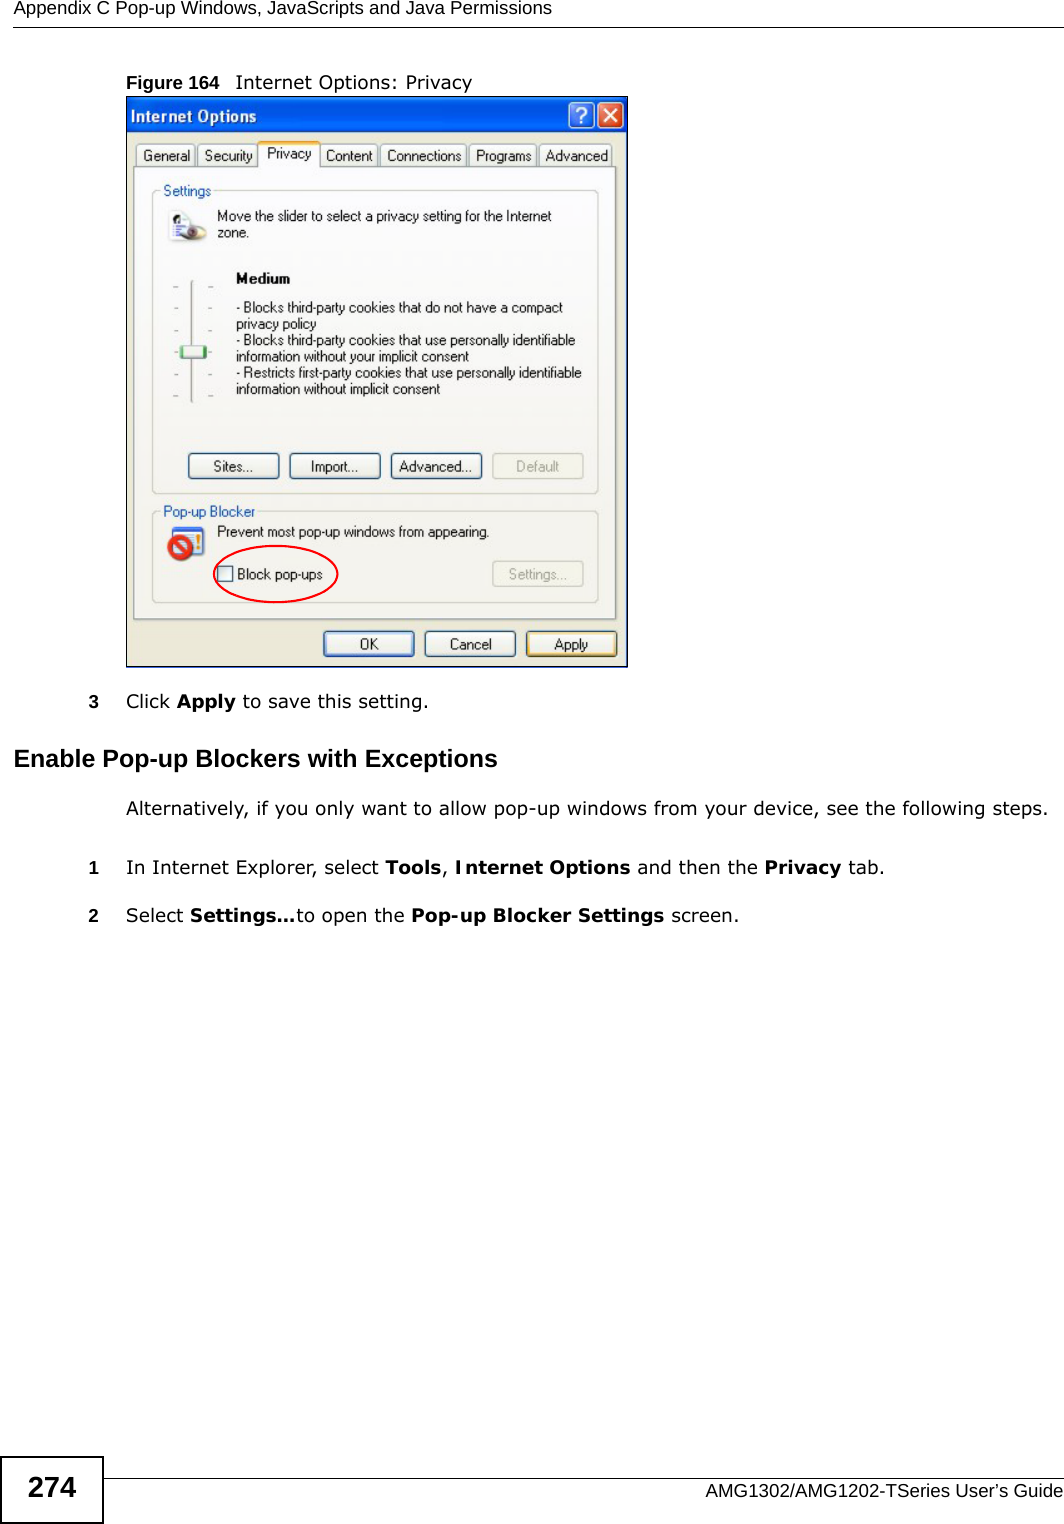 Appendix C Pop-up Windows, JavaScripts and Java PermissionsAMG1302/AMG1202-TSeries User’s Guide274Figure 164   Internet Options: Privacy3Click Apply to save this setting.Enable Pop-up Blockers with ExceptionsAlternatively, if you only want to allow pop-up windows from your device, see the following steps.1In Internet Explorer, select Tools, Internet Options and then the Privacy tab. 2Select Settings…to open the Pop-up Blocker Settings screen.